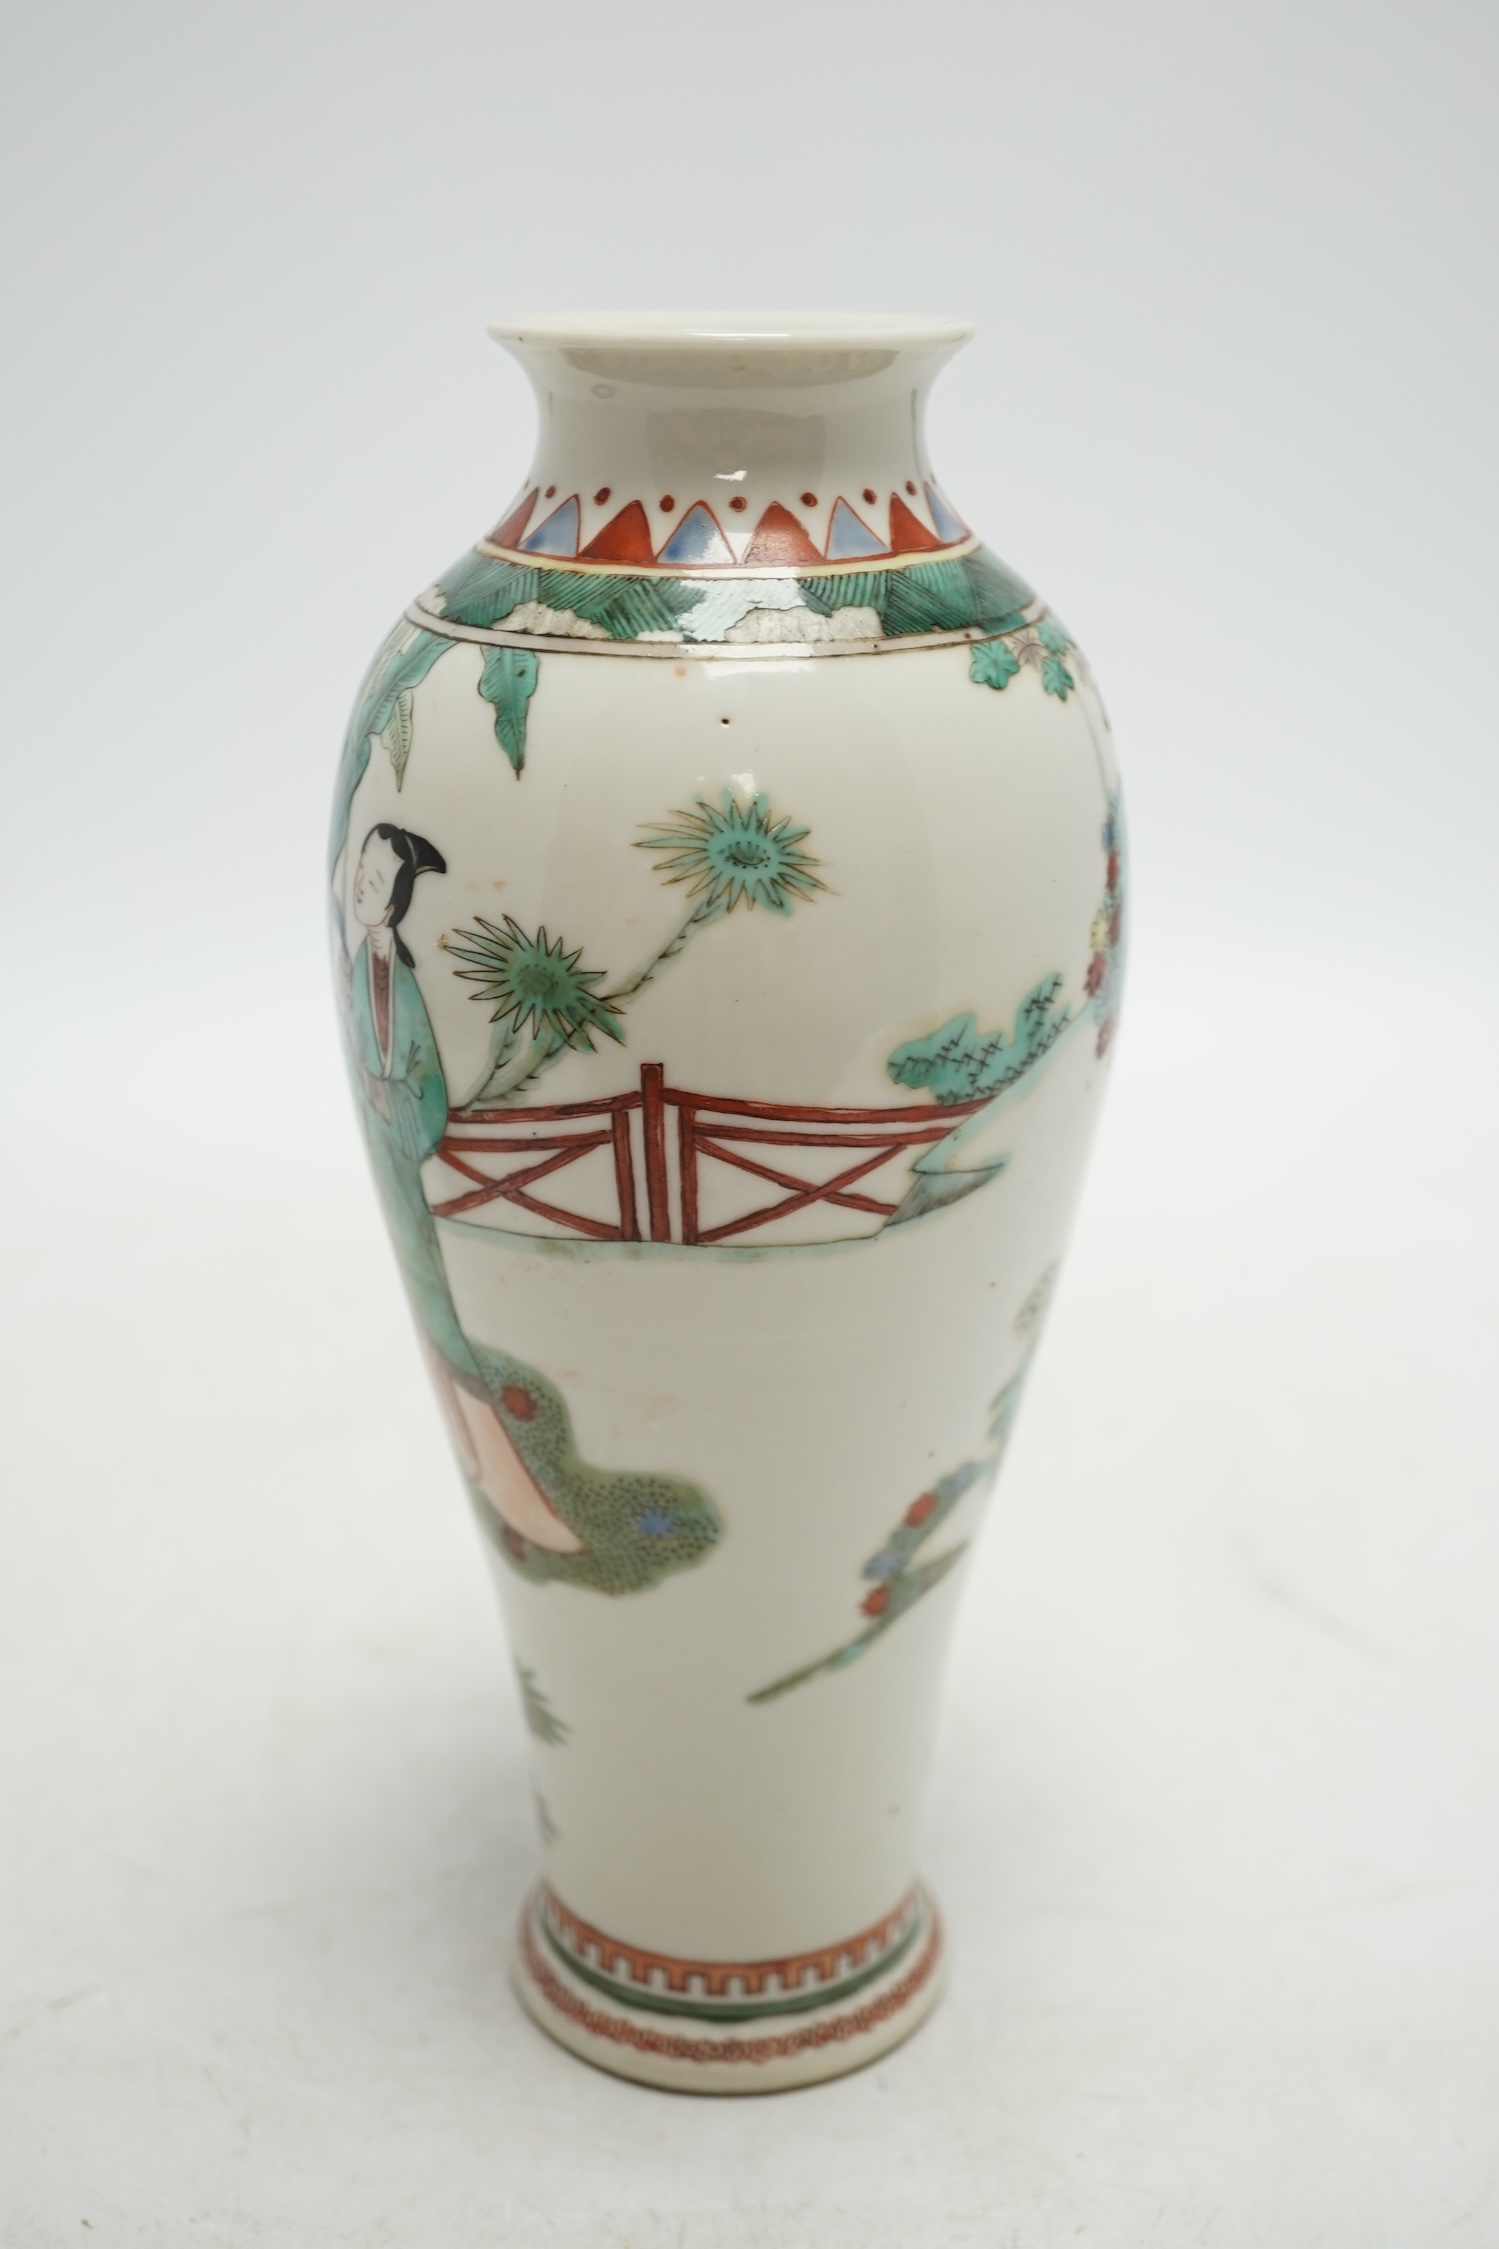 A 19th century Chinese porcelain famille verte vase and associated hardwood stand, 23cm high. Condition - good